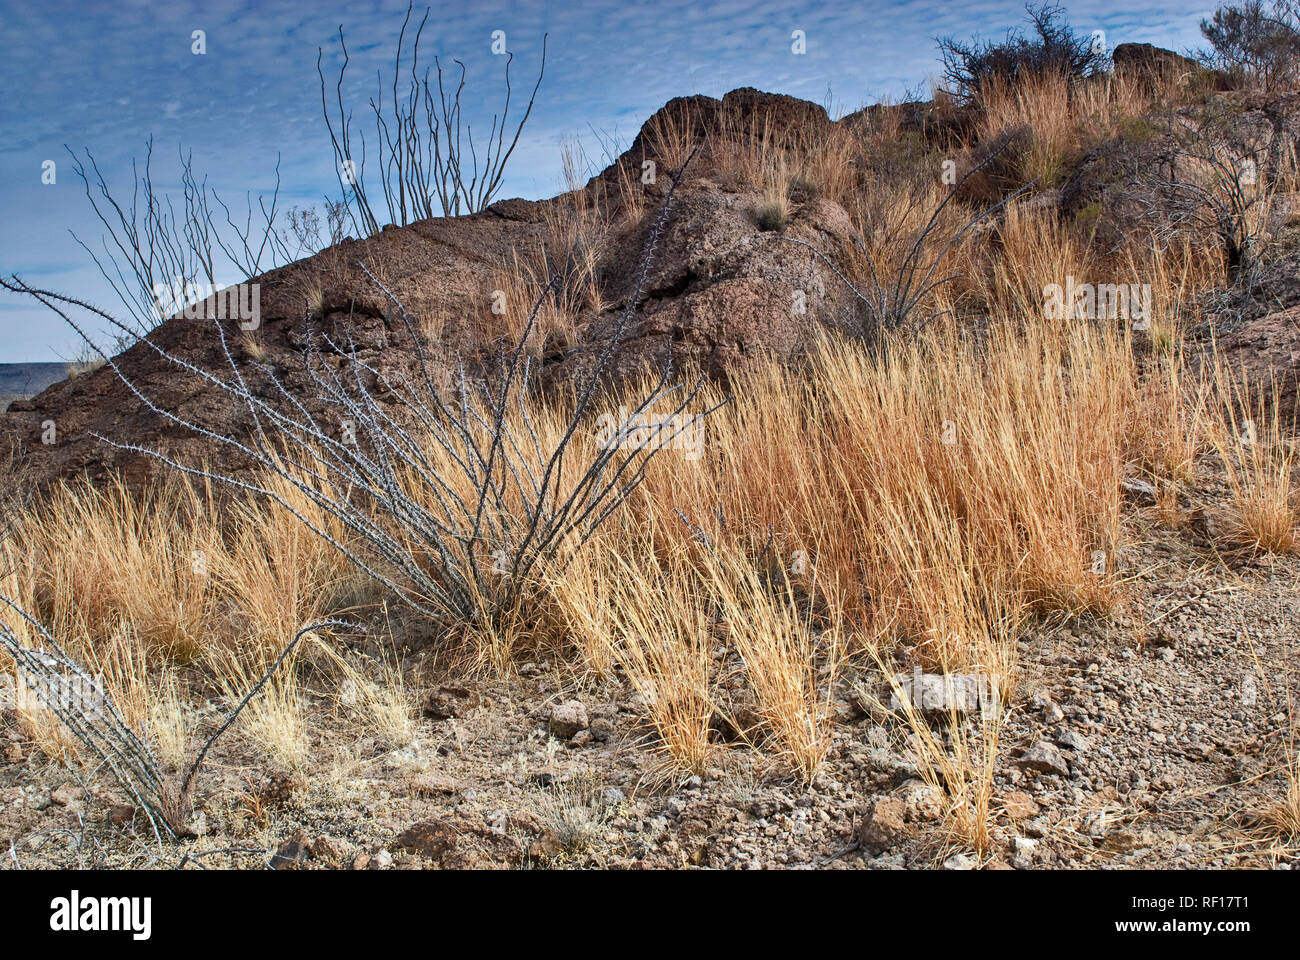 Grass growing back after decades of overgrazing damage, Chihuahuan Desert, Cinco Tinajas Trail at Big Bend Ranch State Park, Texas, USA Stock Photo